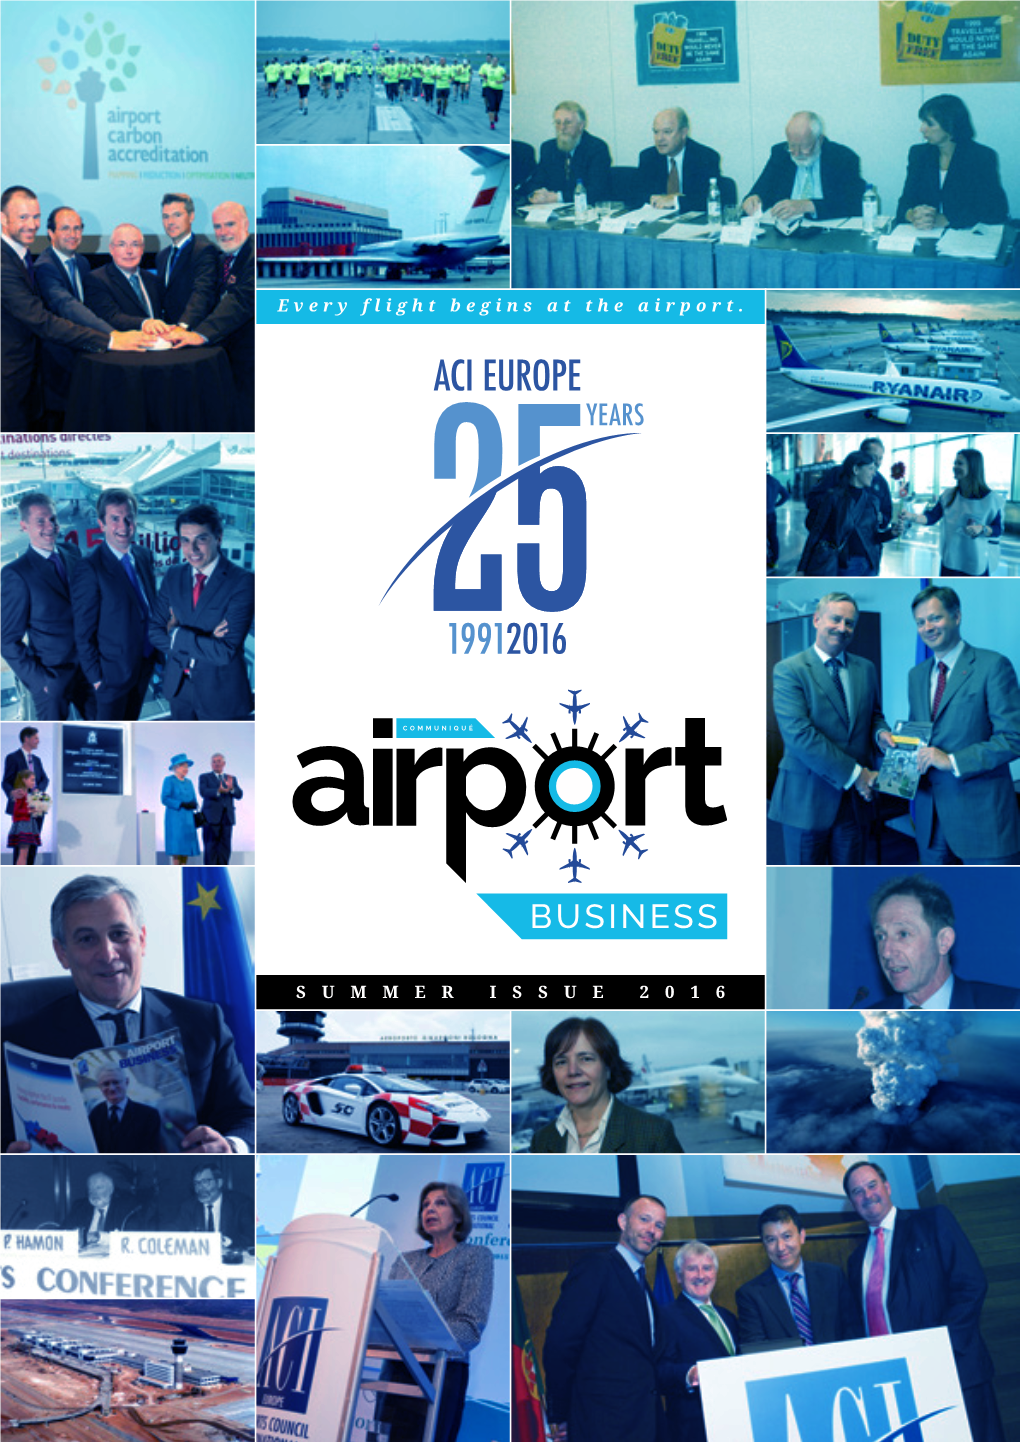 Airport Business Are Not Necessarily Those of ACI EUROPE Or the Publisher